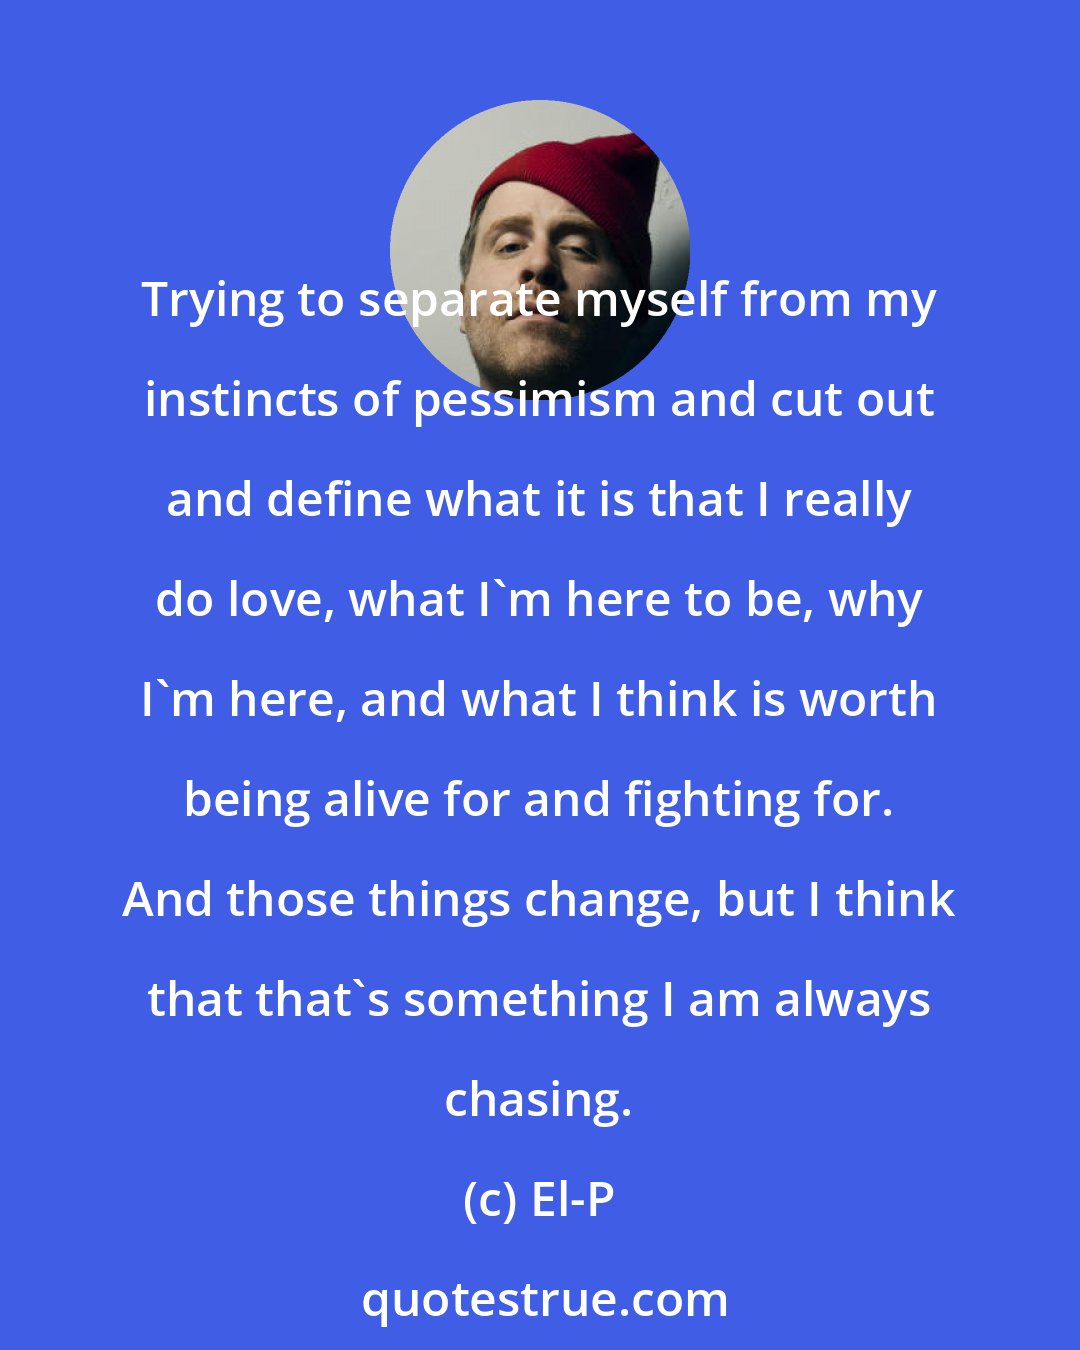 El-P: Trying to separate myself from my instincts of pessimism and cut out and define what it is that I really do love, what I'm here to be, why I'm here, and what I think is worth being alive for and fighting for. And those things change, but I think that that's something I am always chasing.